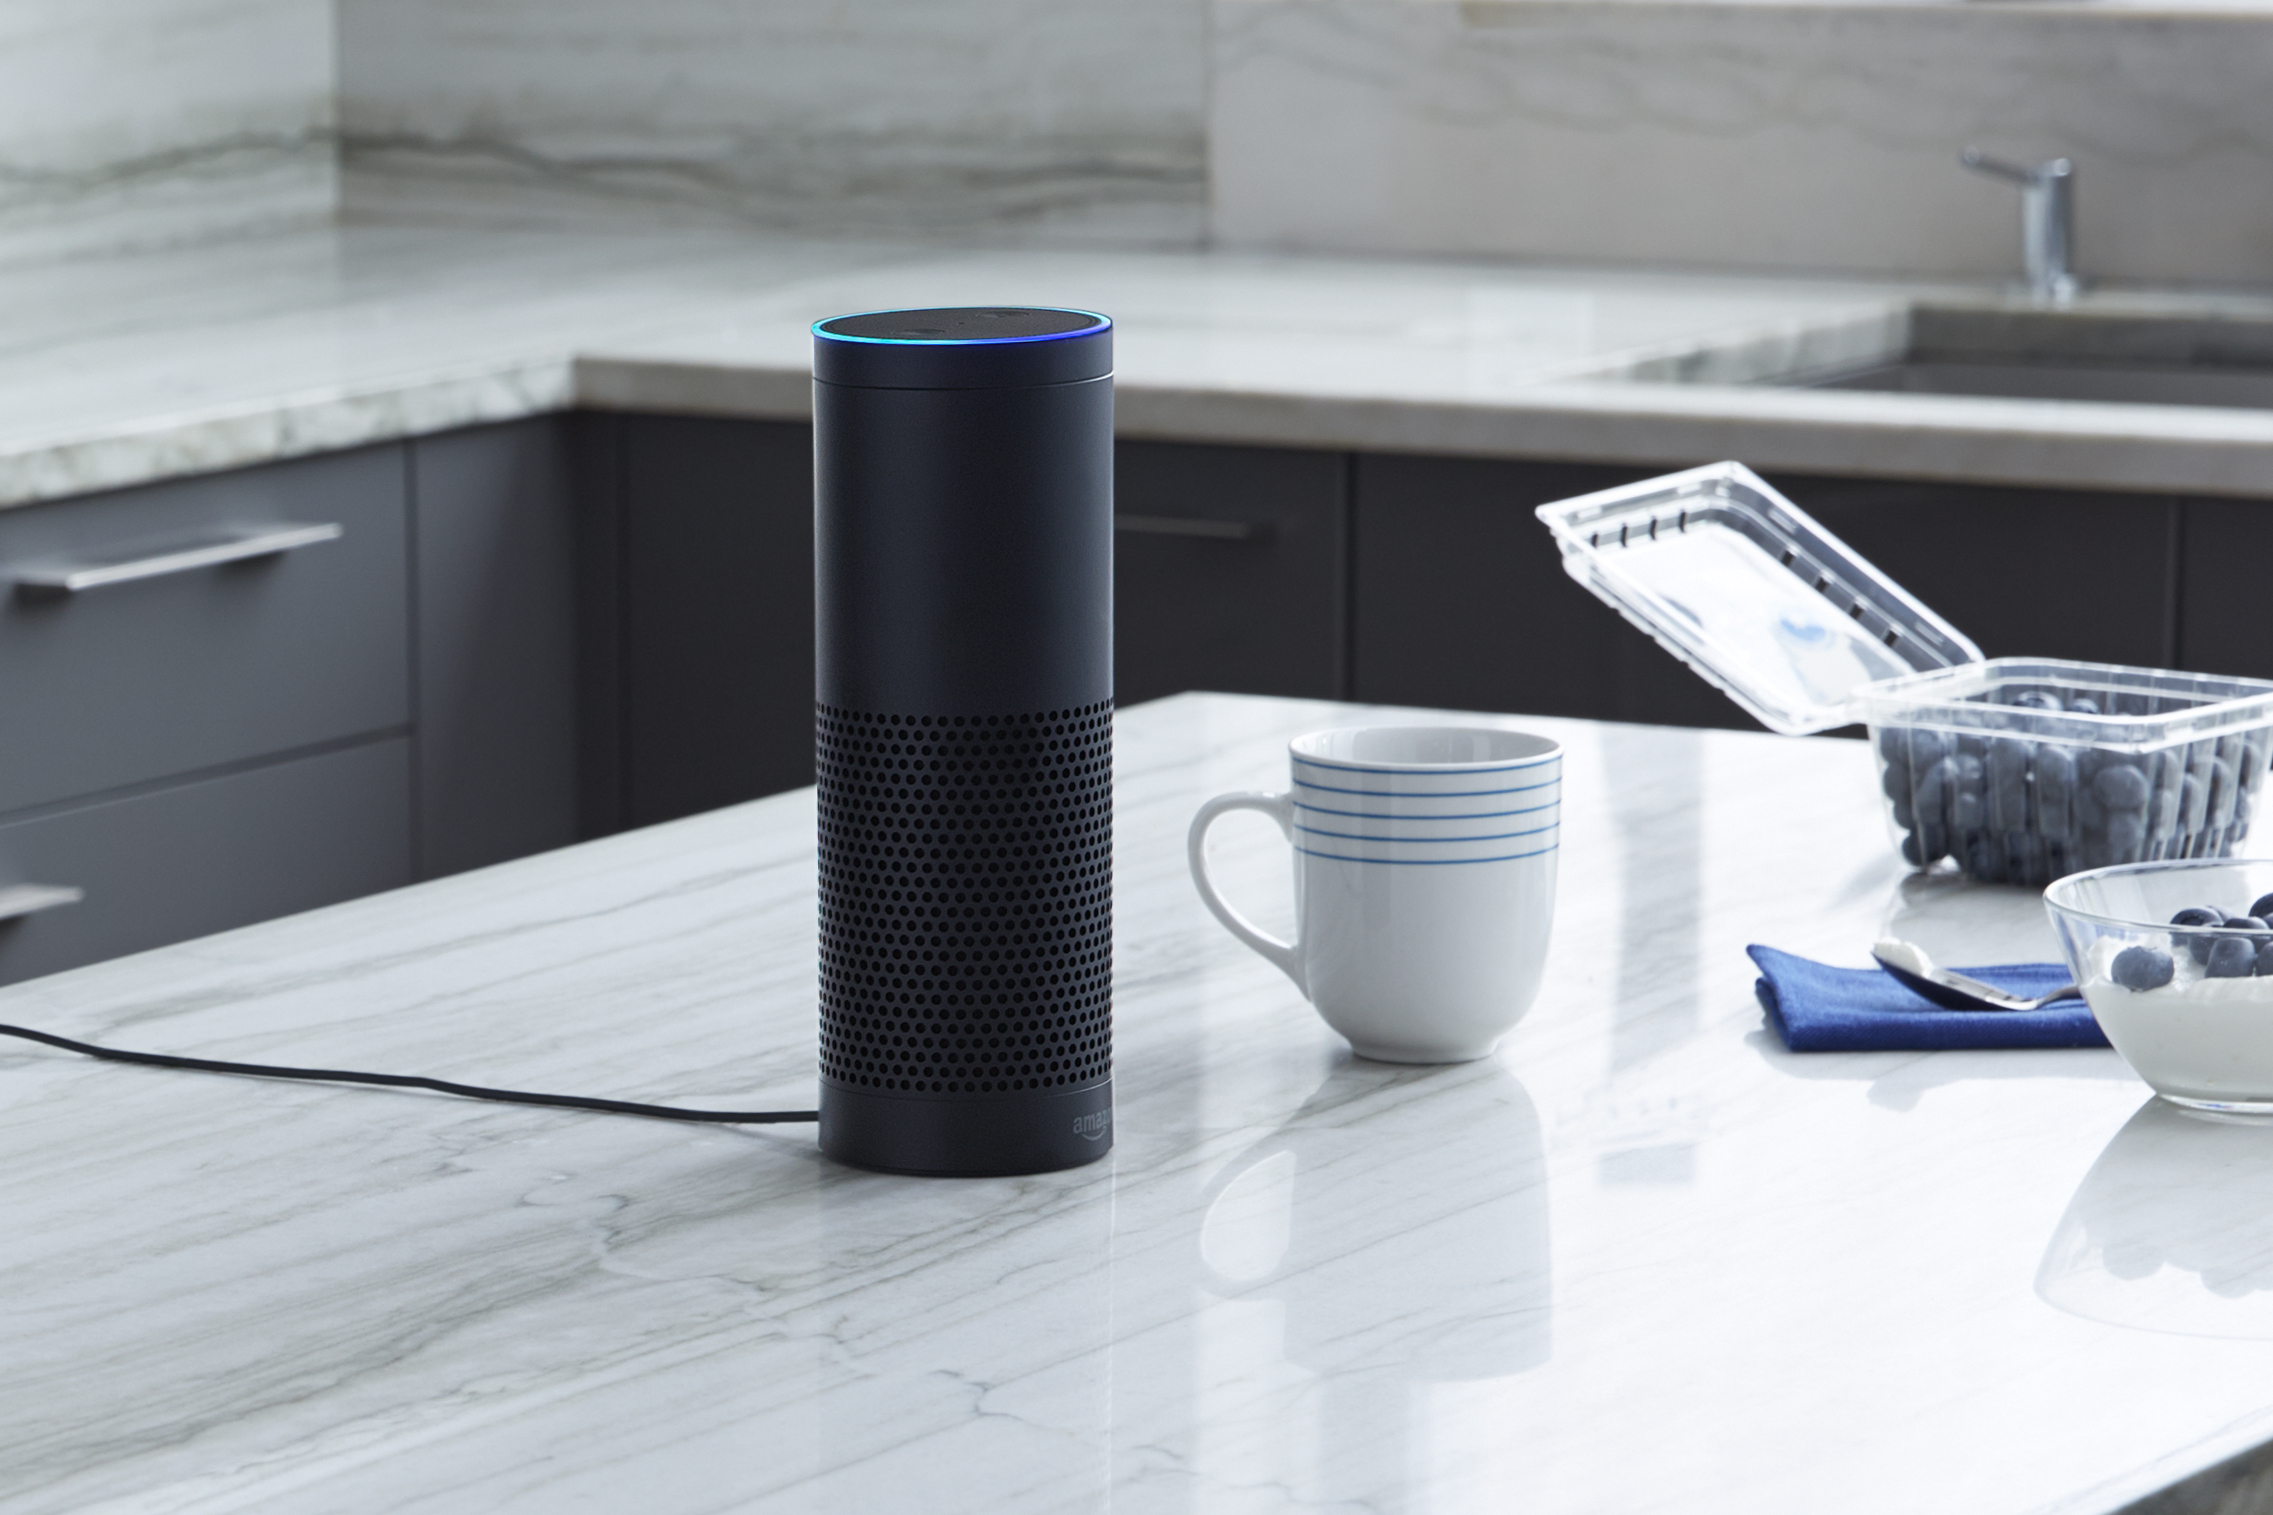 Amazon Echo and the internet of things that spy on you